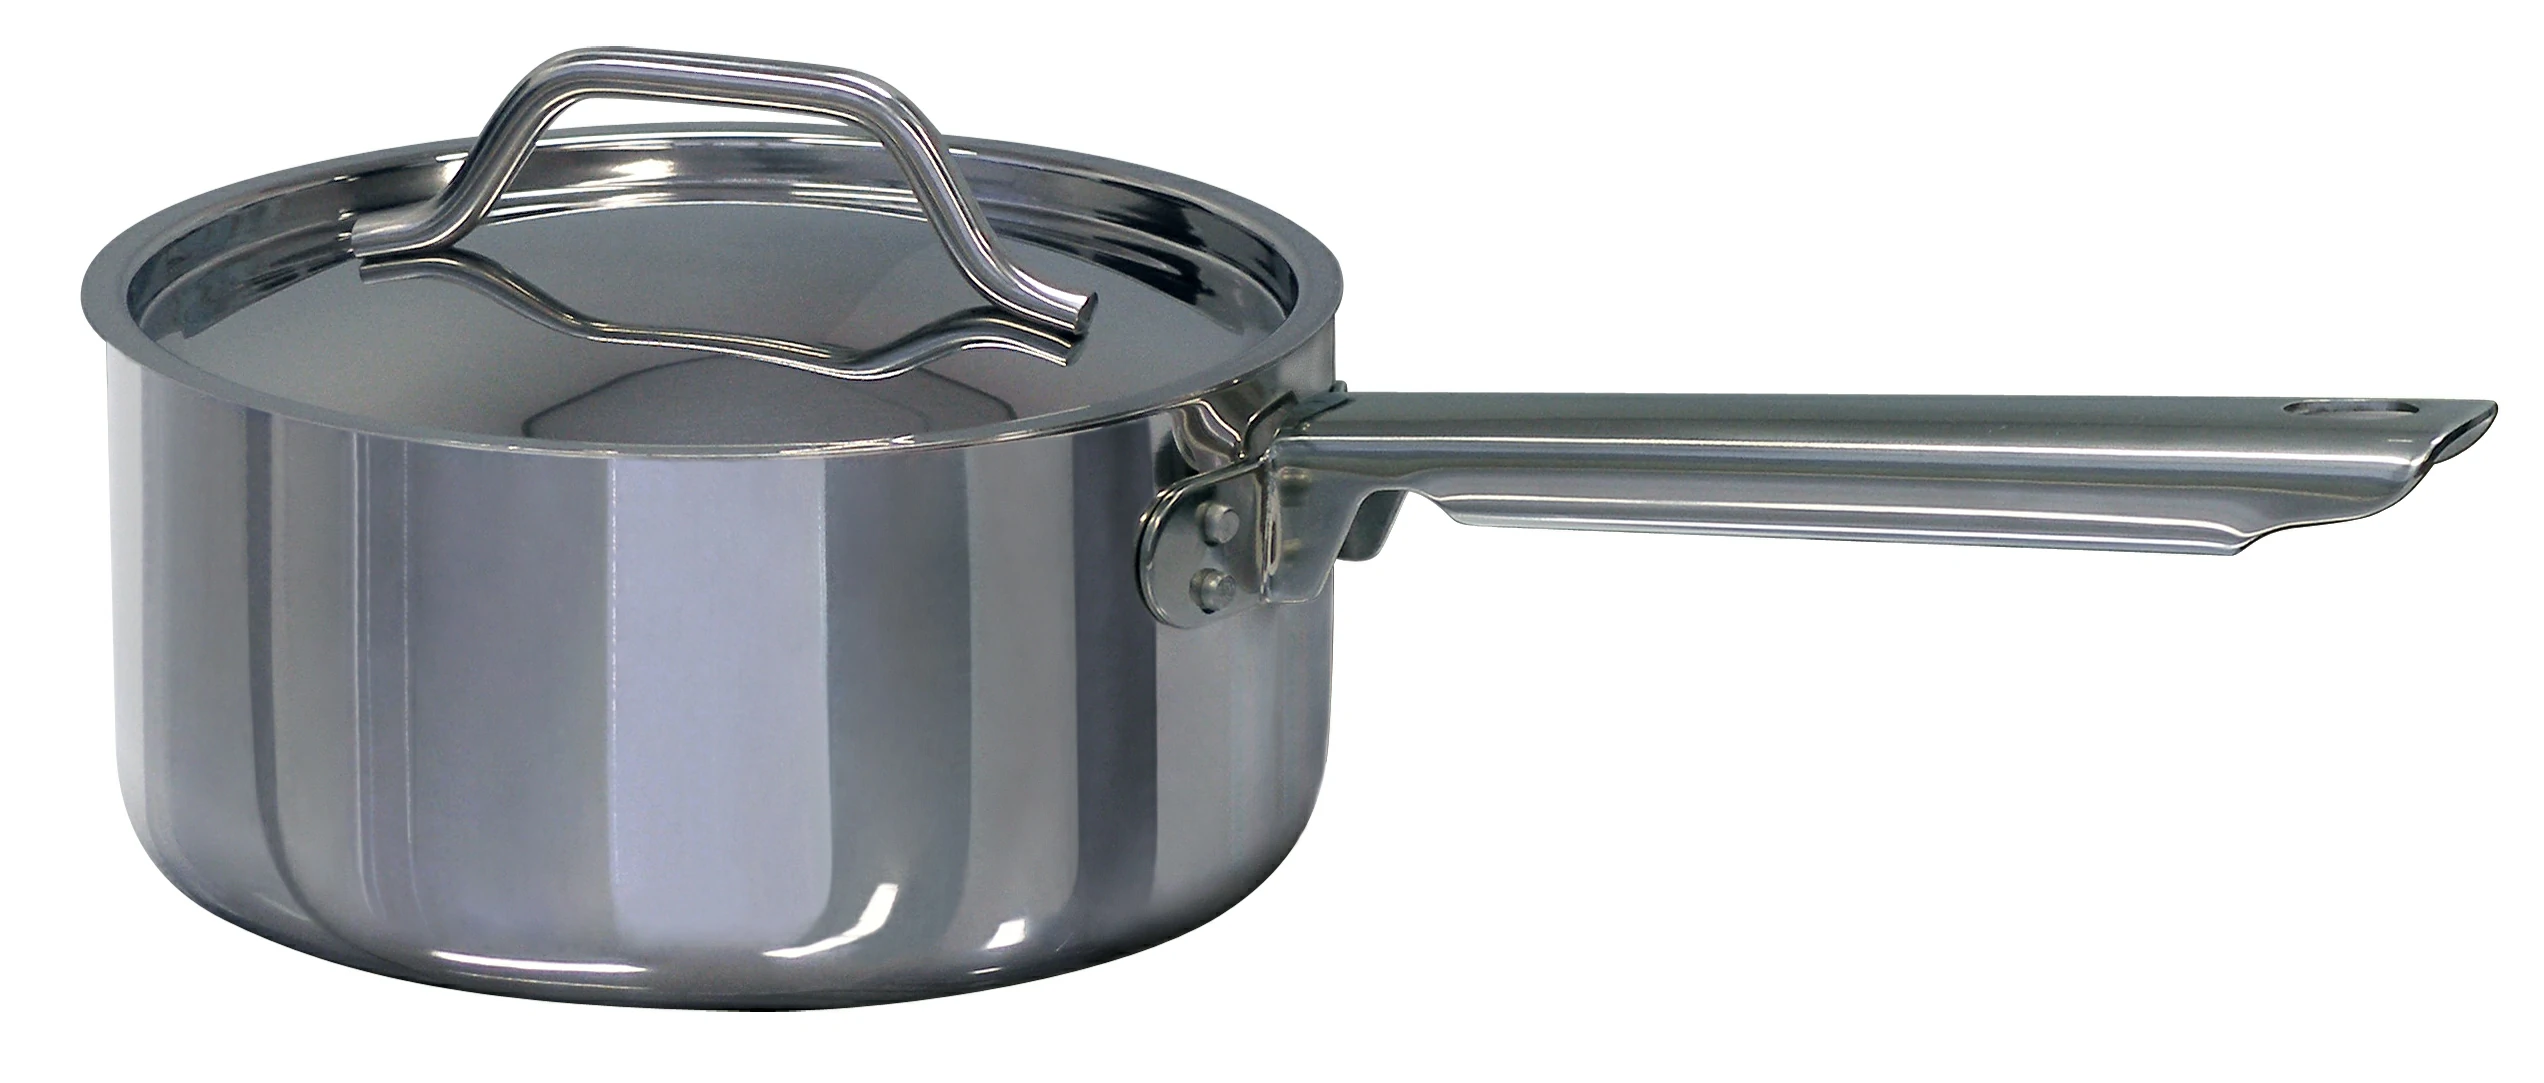 Extreme performance stainless steel 2 litre saucepan